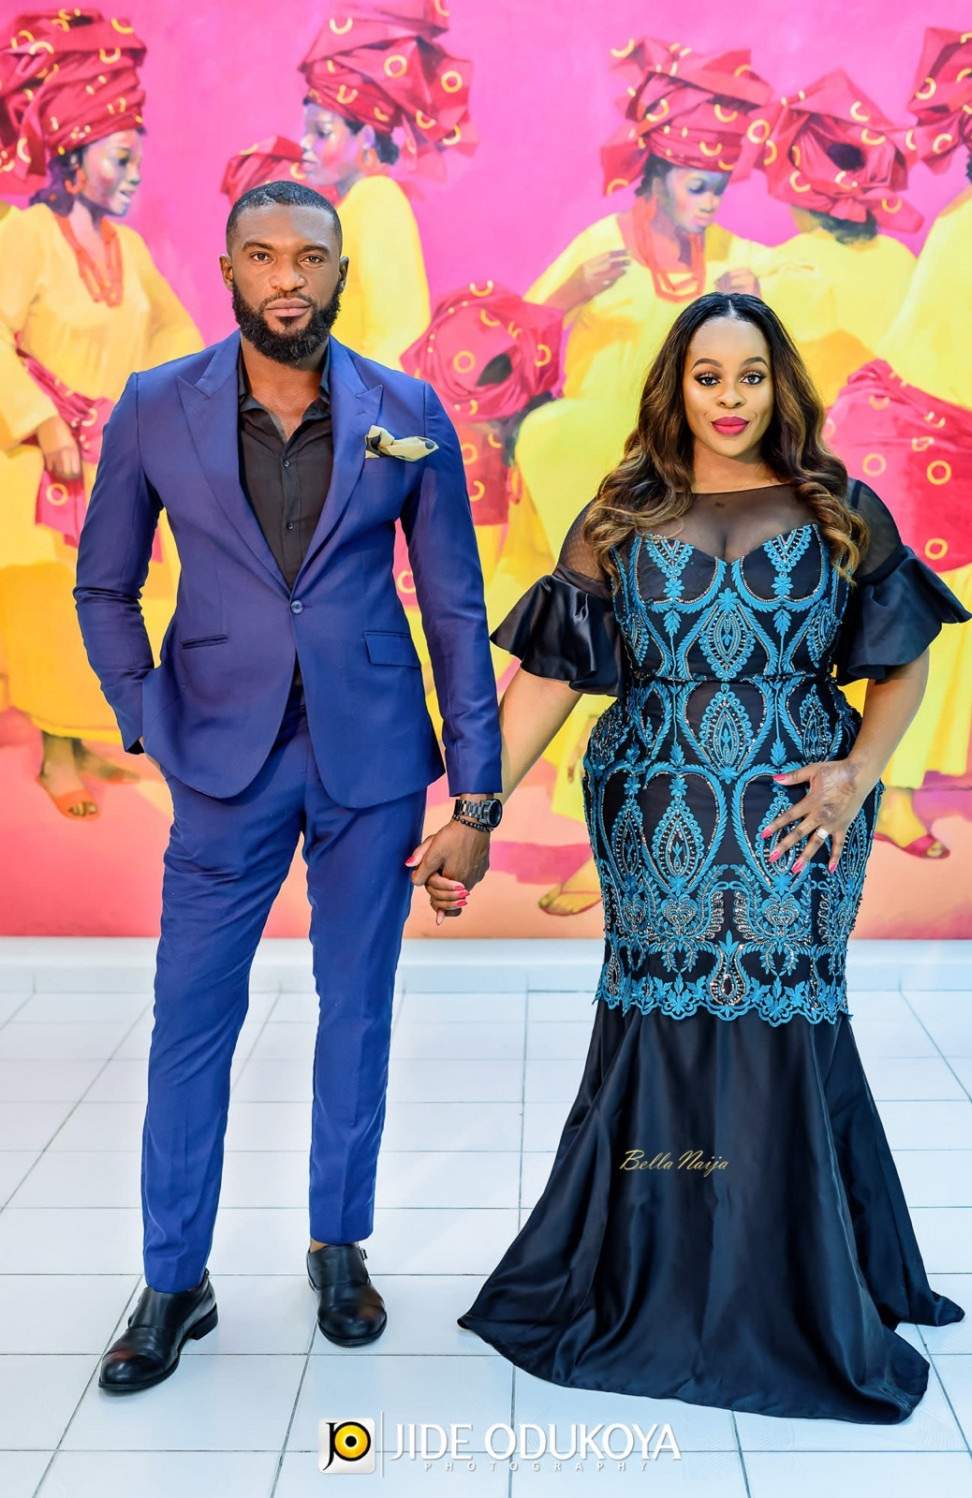 Actor Kenneth Okolie and wife, Jessica welcome their first child